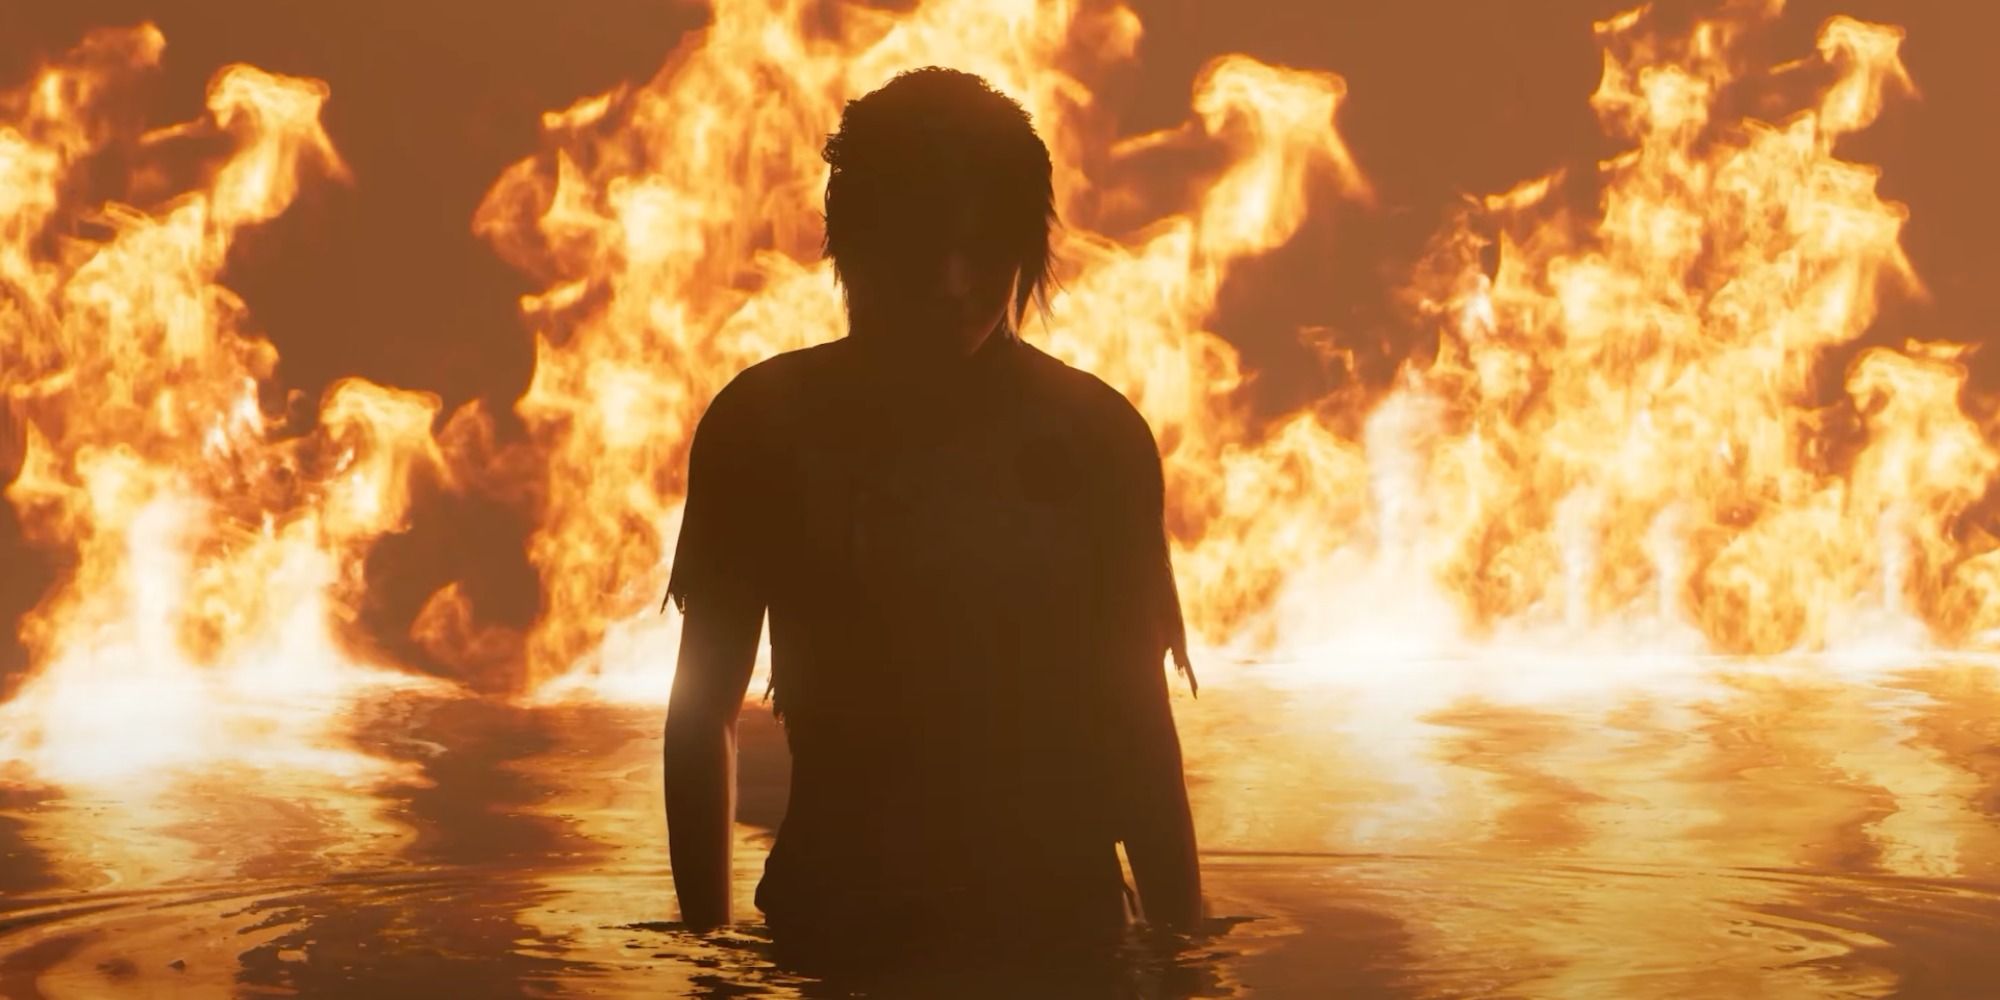 Lara Croft emerges from the water and flames in Shadow of the Tomb Raider